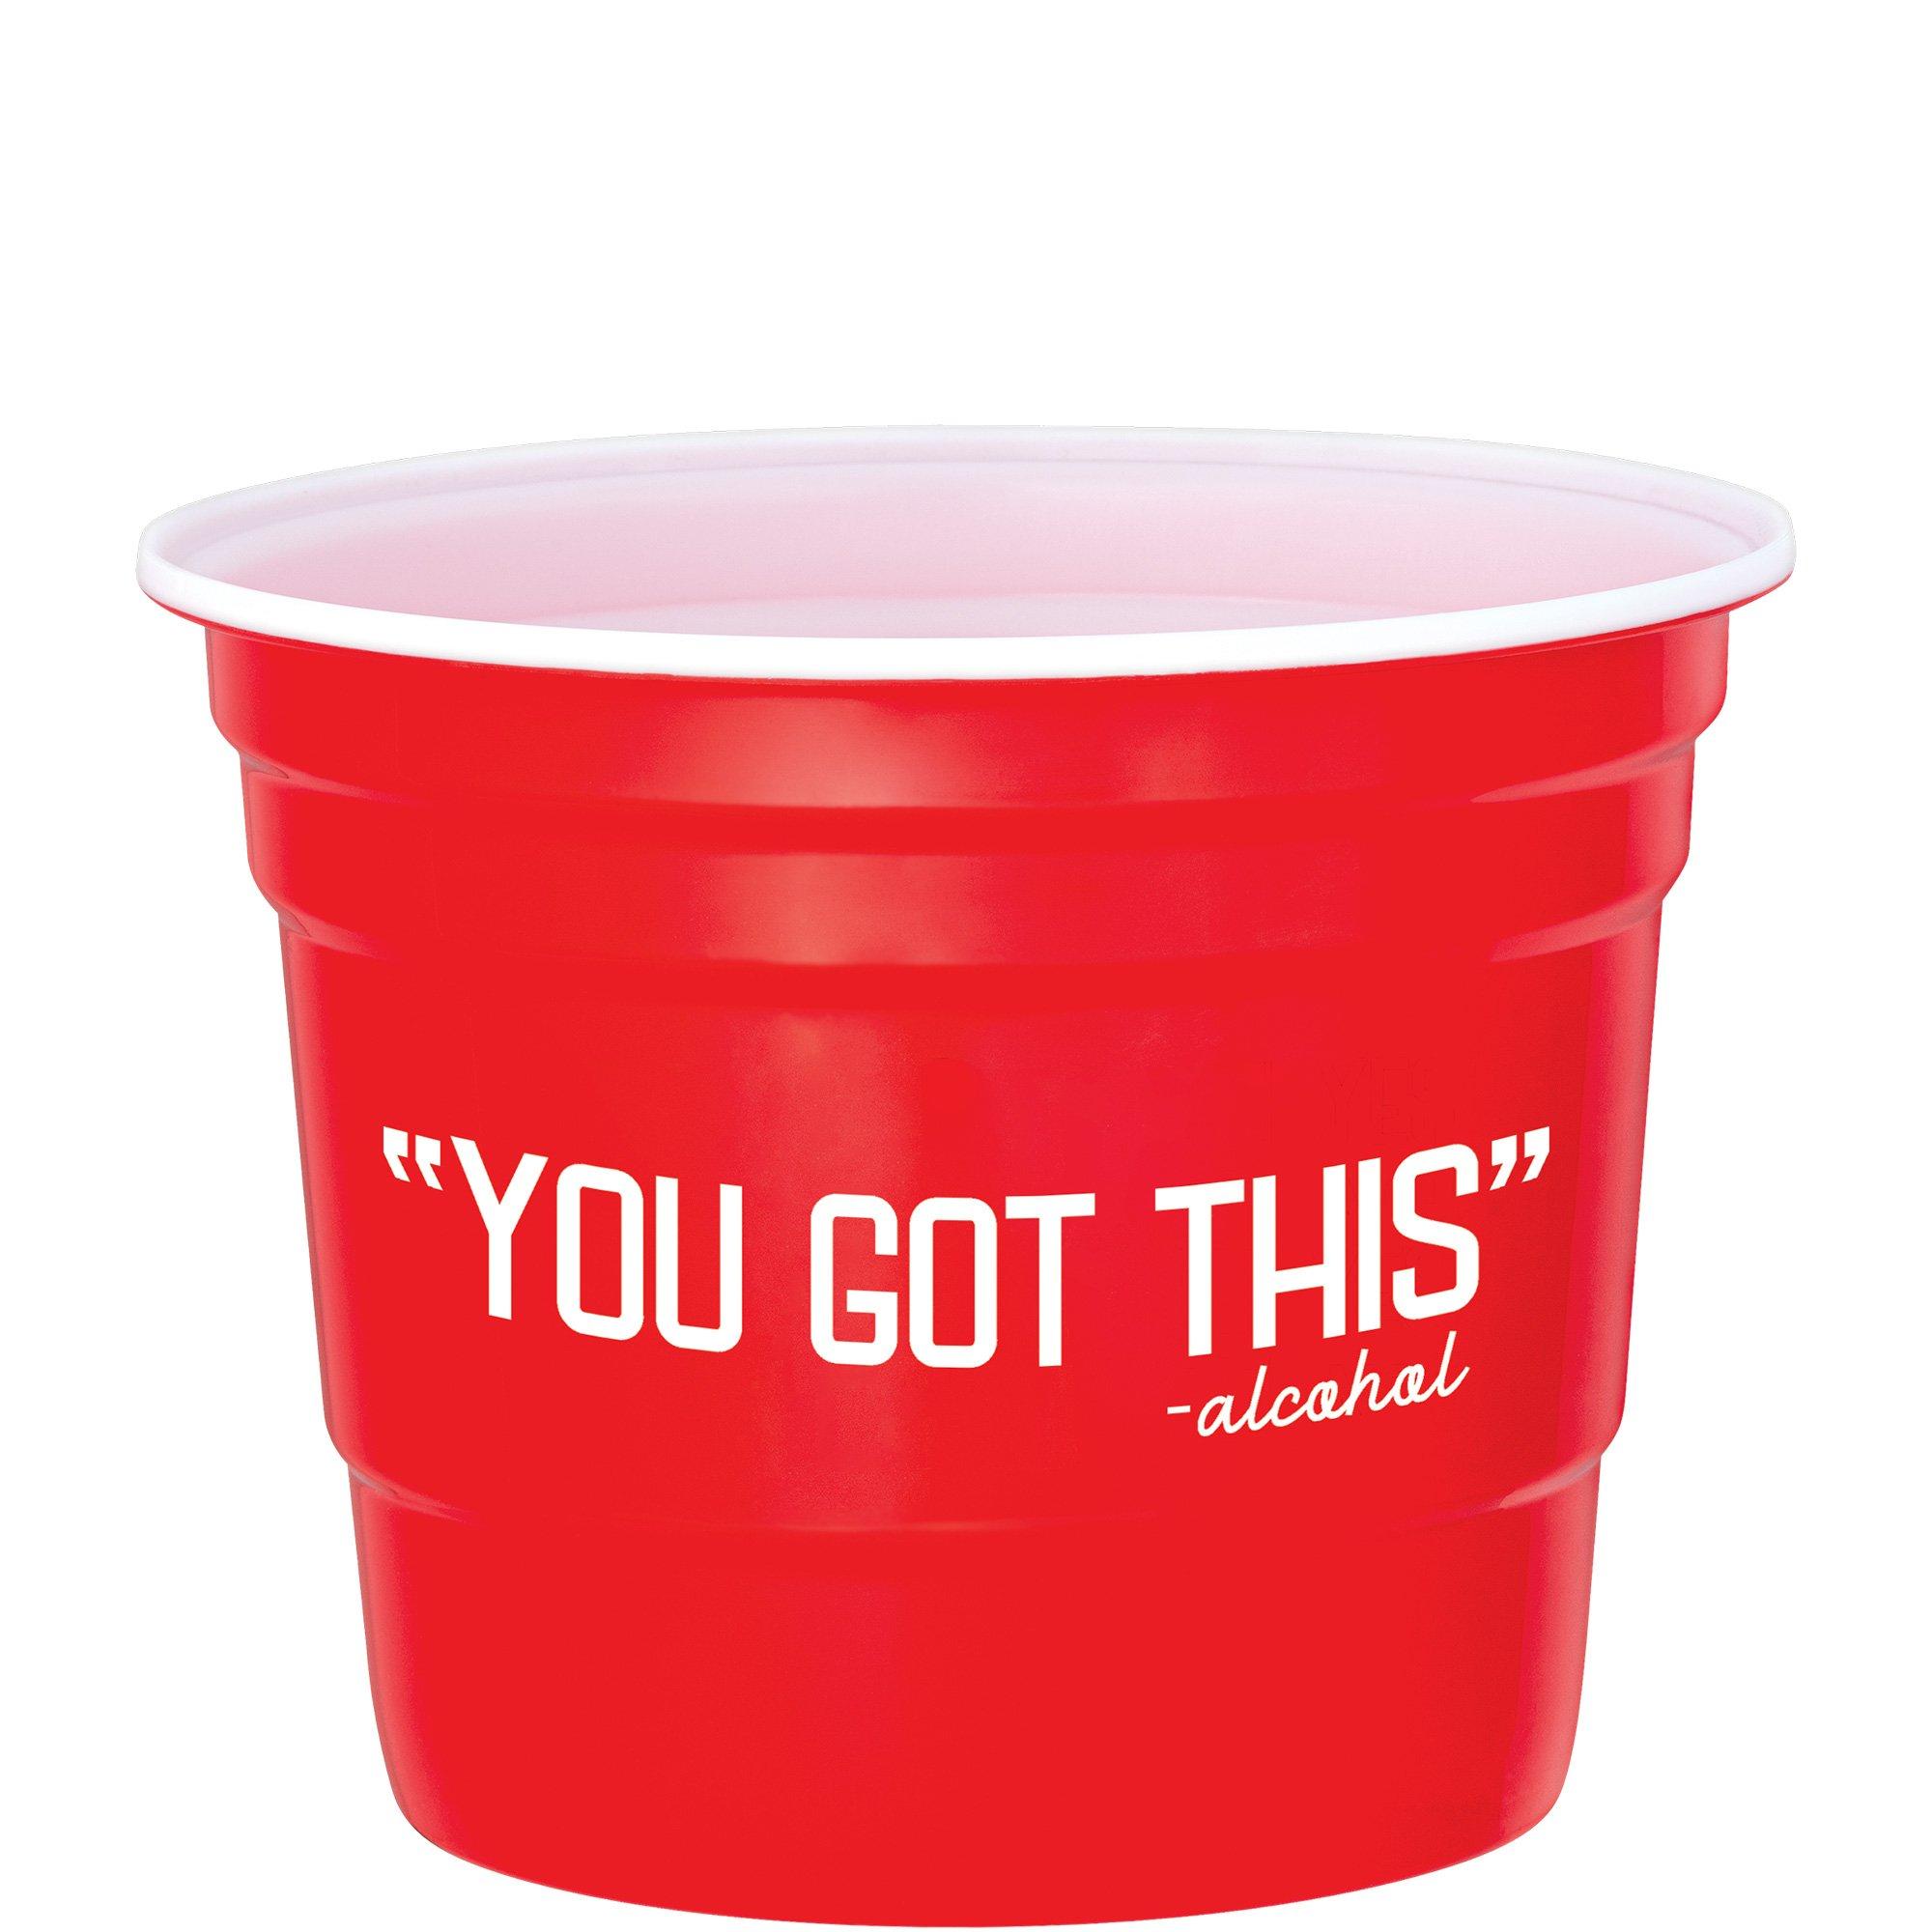 You Got This Party Cup Plastic Ice Bucket, 9.65in x 7.7in, 1.58gal